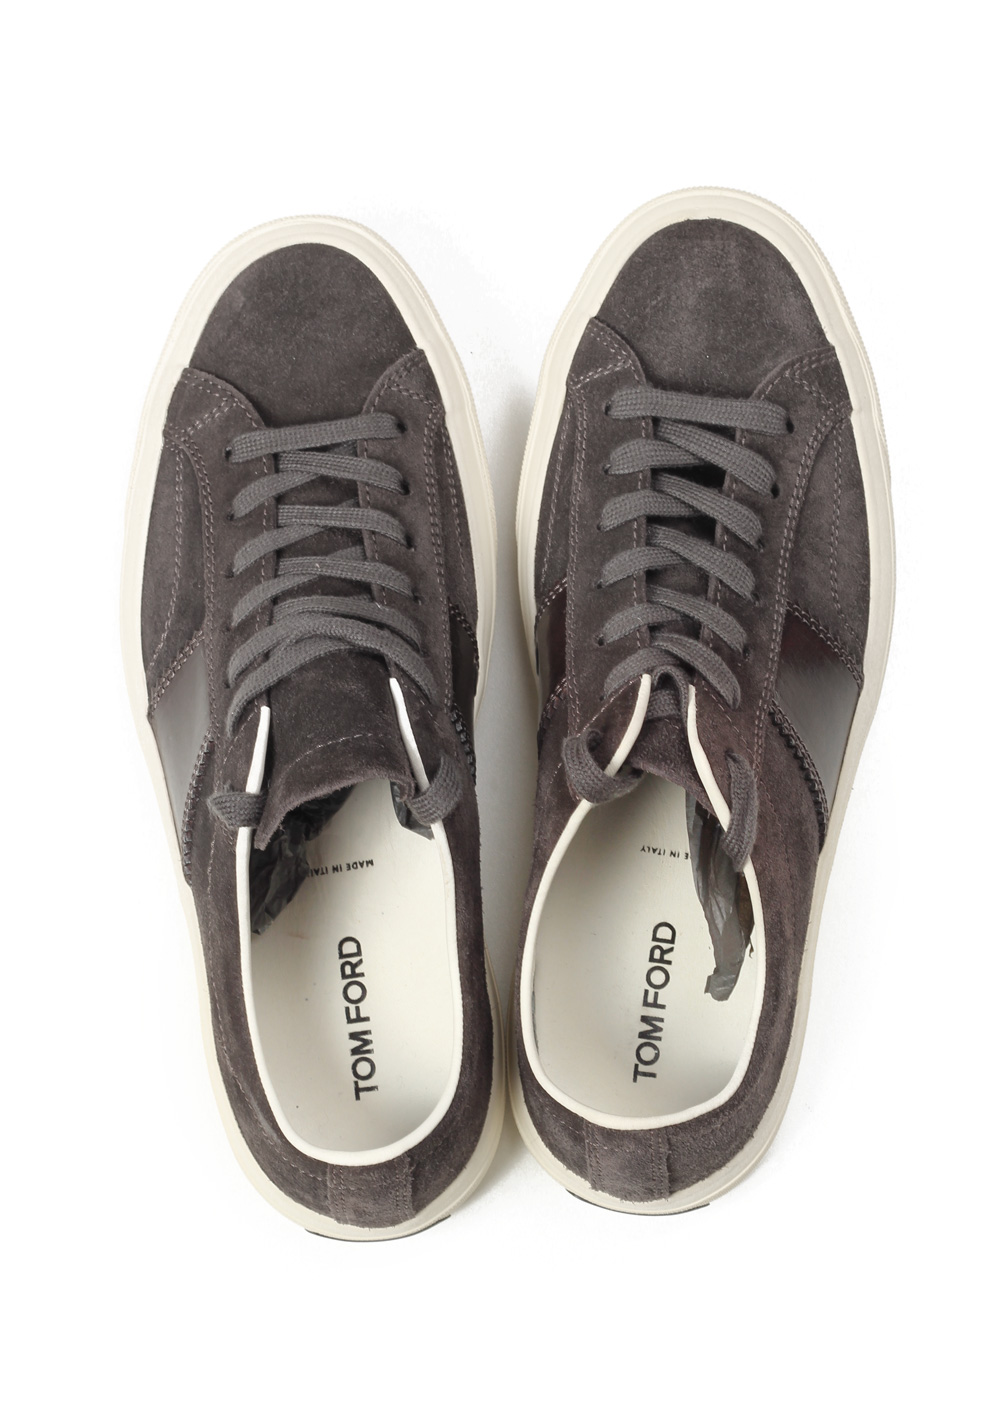 TOM FORD Cambridge Lace Up Dark Gray Suede Sneaker Shoes Size 9,5 UK / 10,5 U.S. | Costume Limité